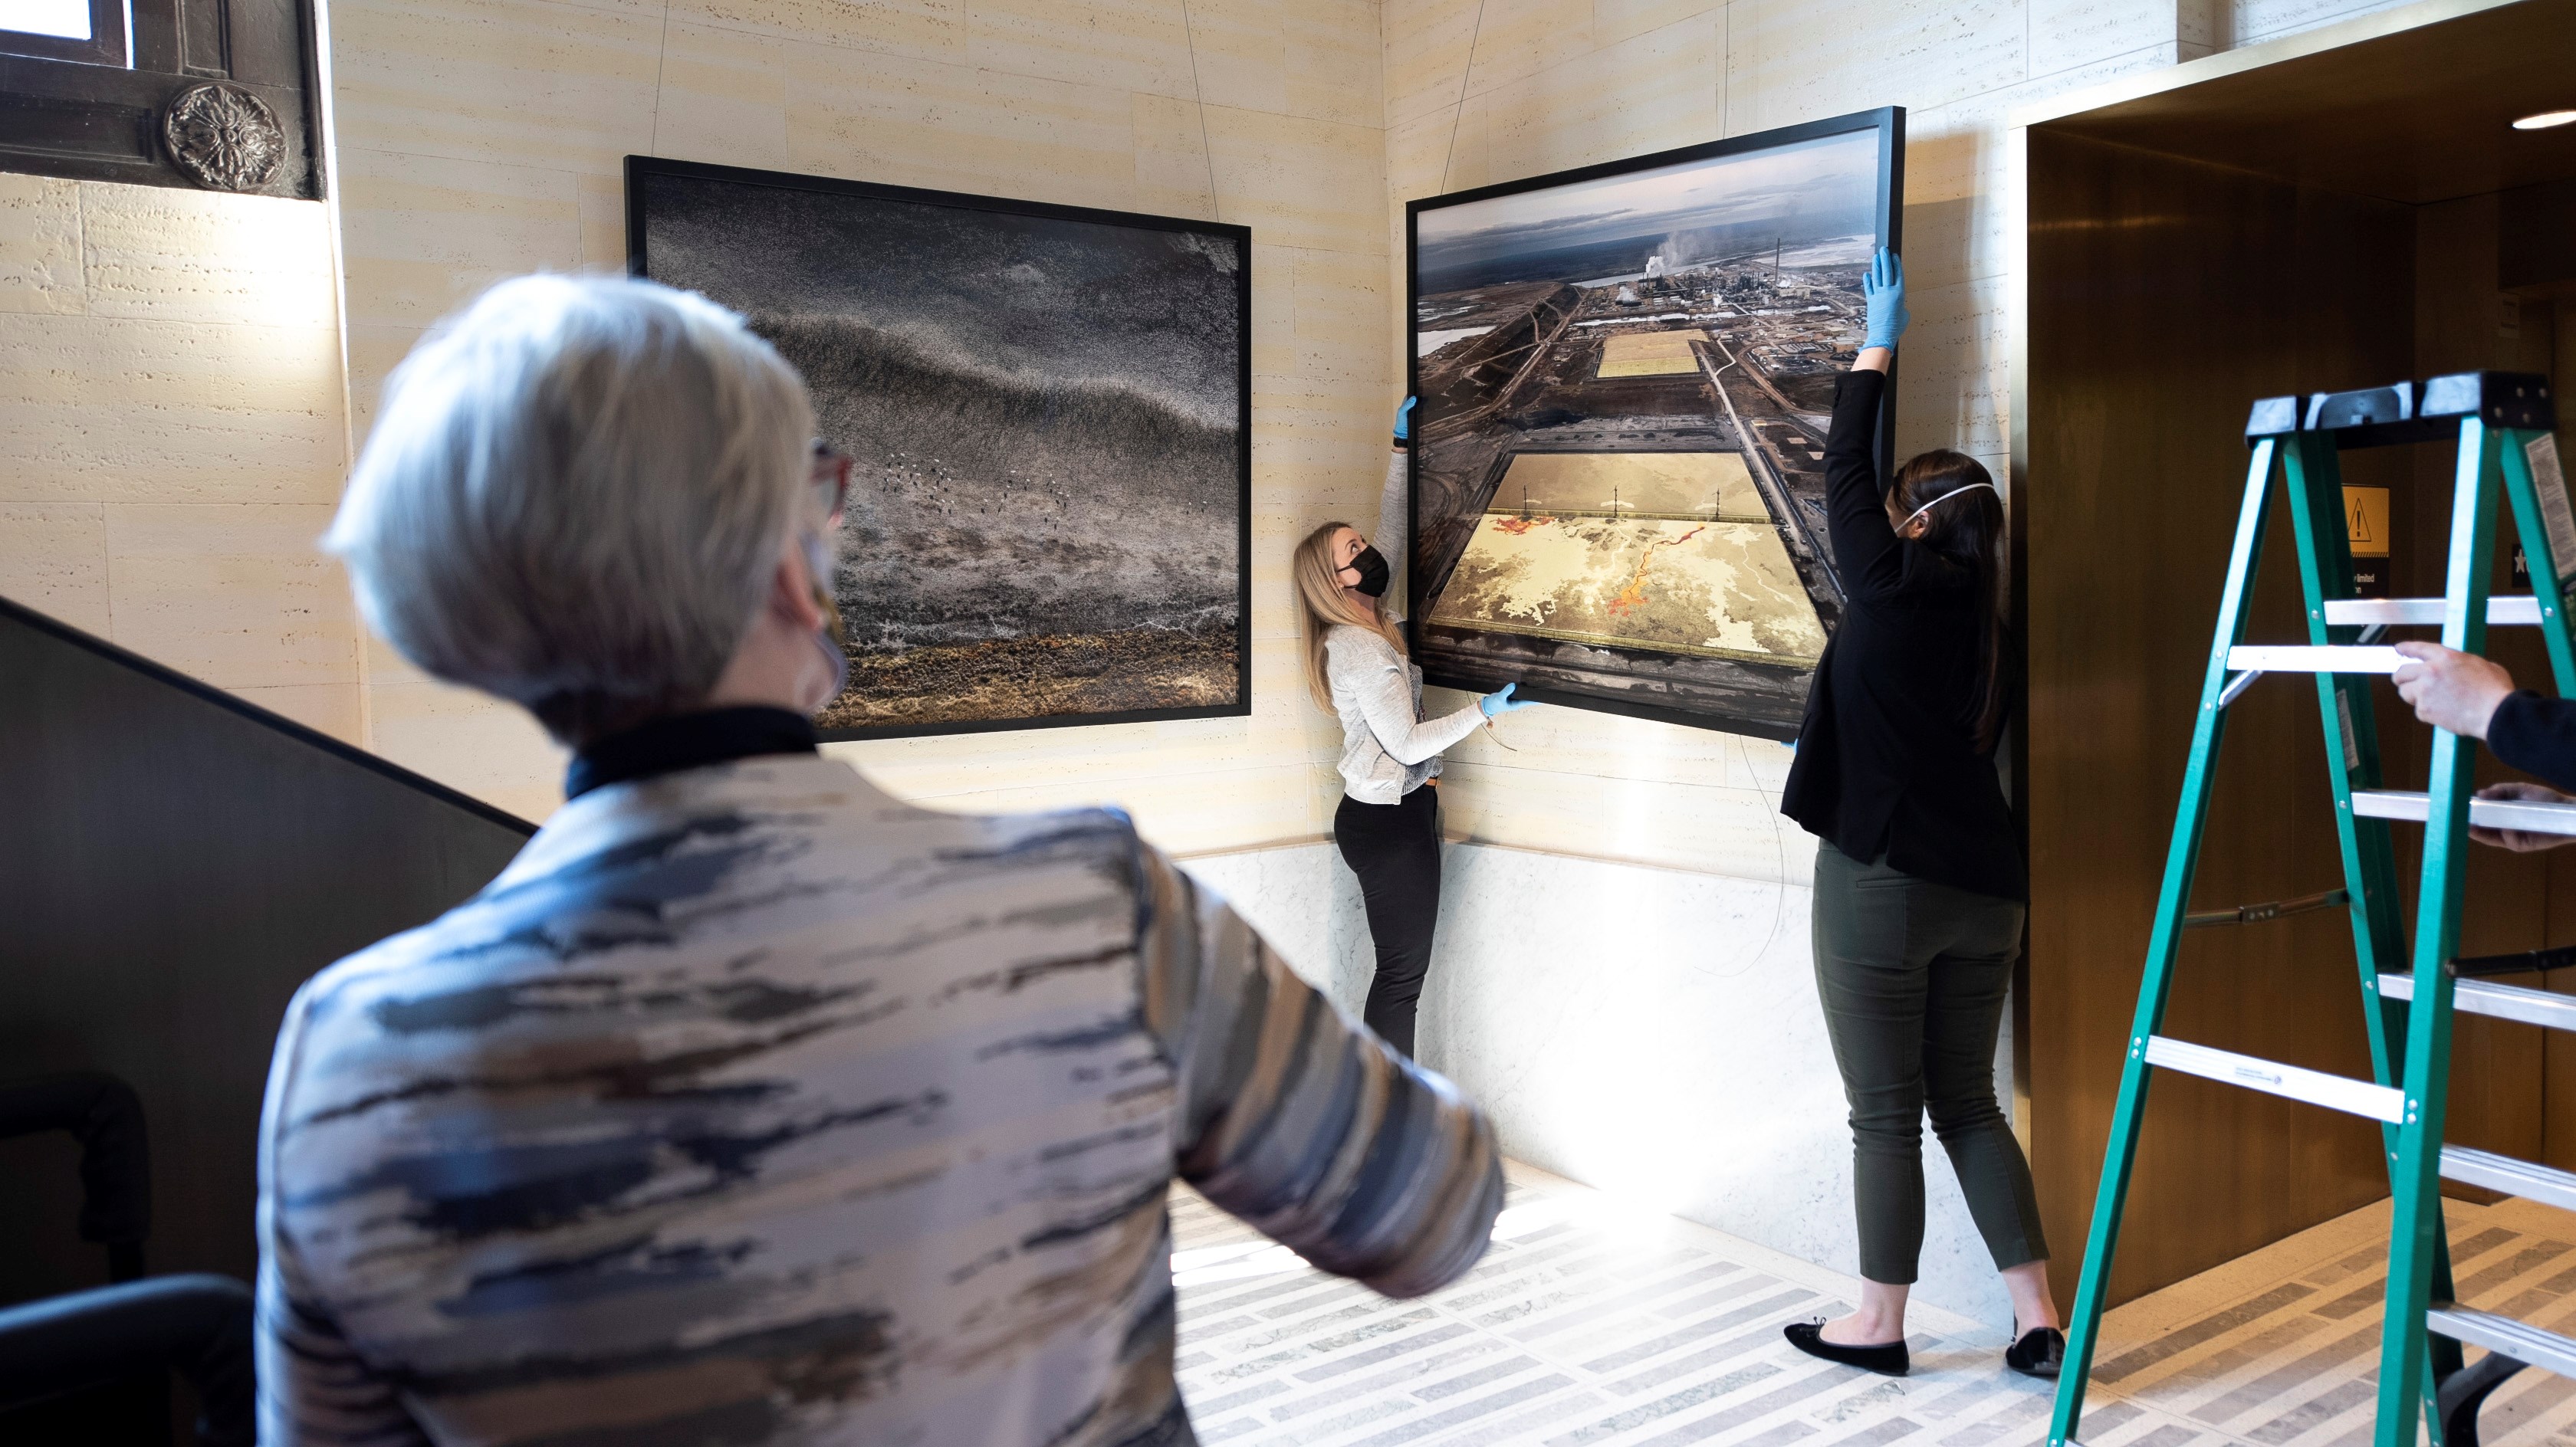 Senator Patricia Bovey (left) oversees the installation of the “Visual Voices: Artists & the Environment” exhibit in the Senate of Canada Building on April 28, 2022